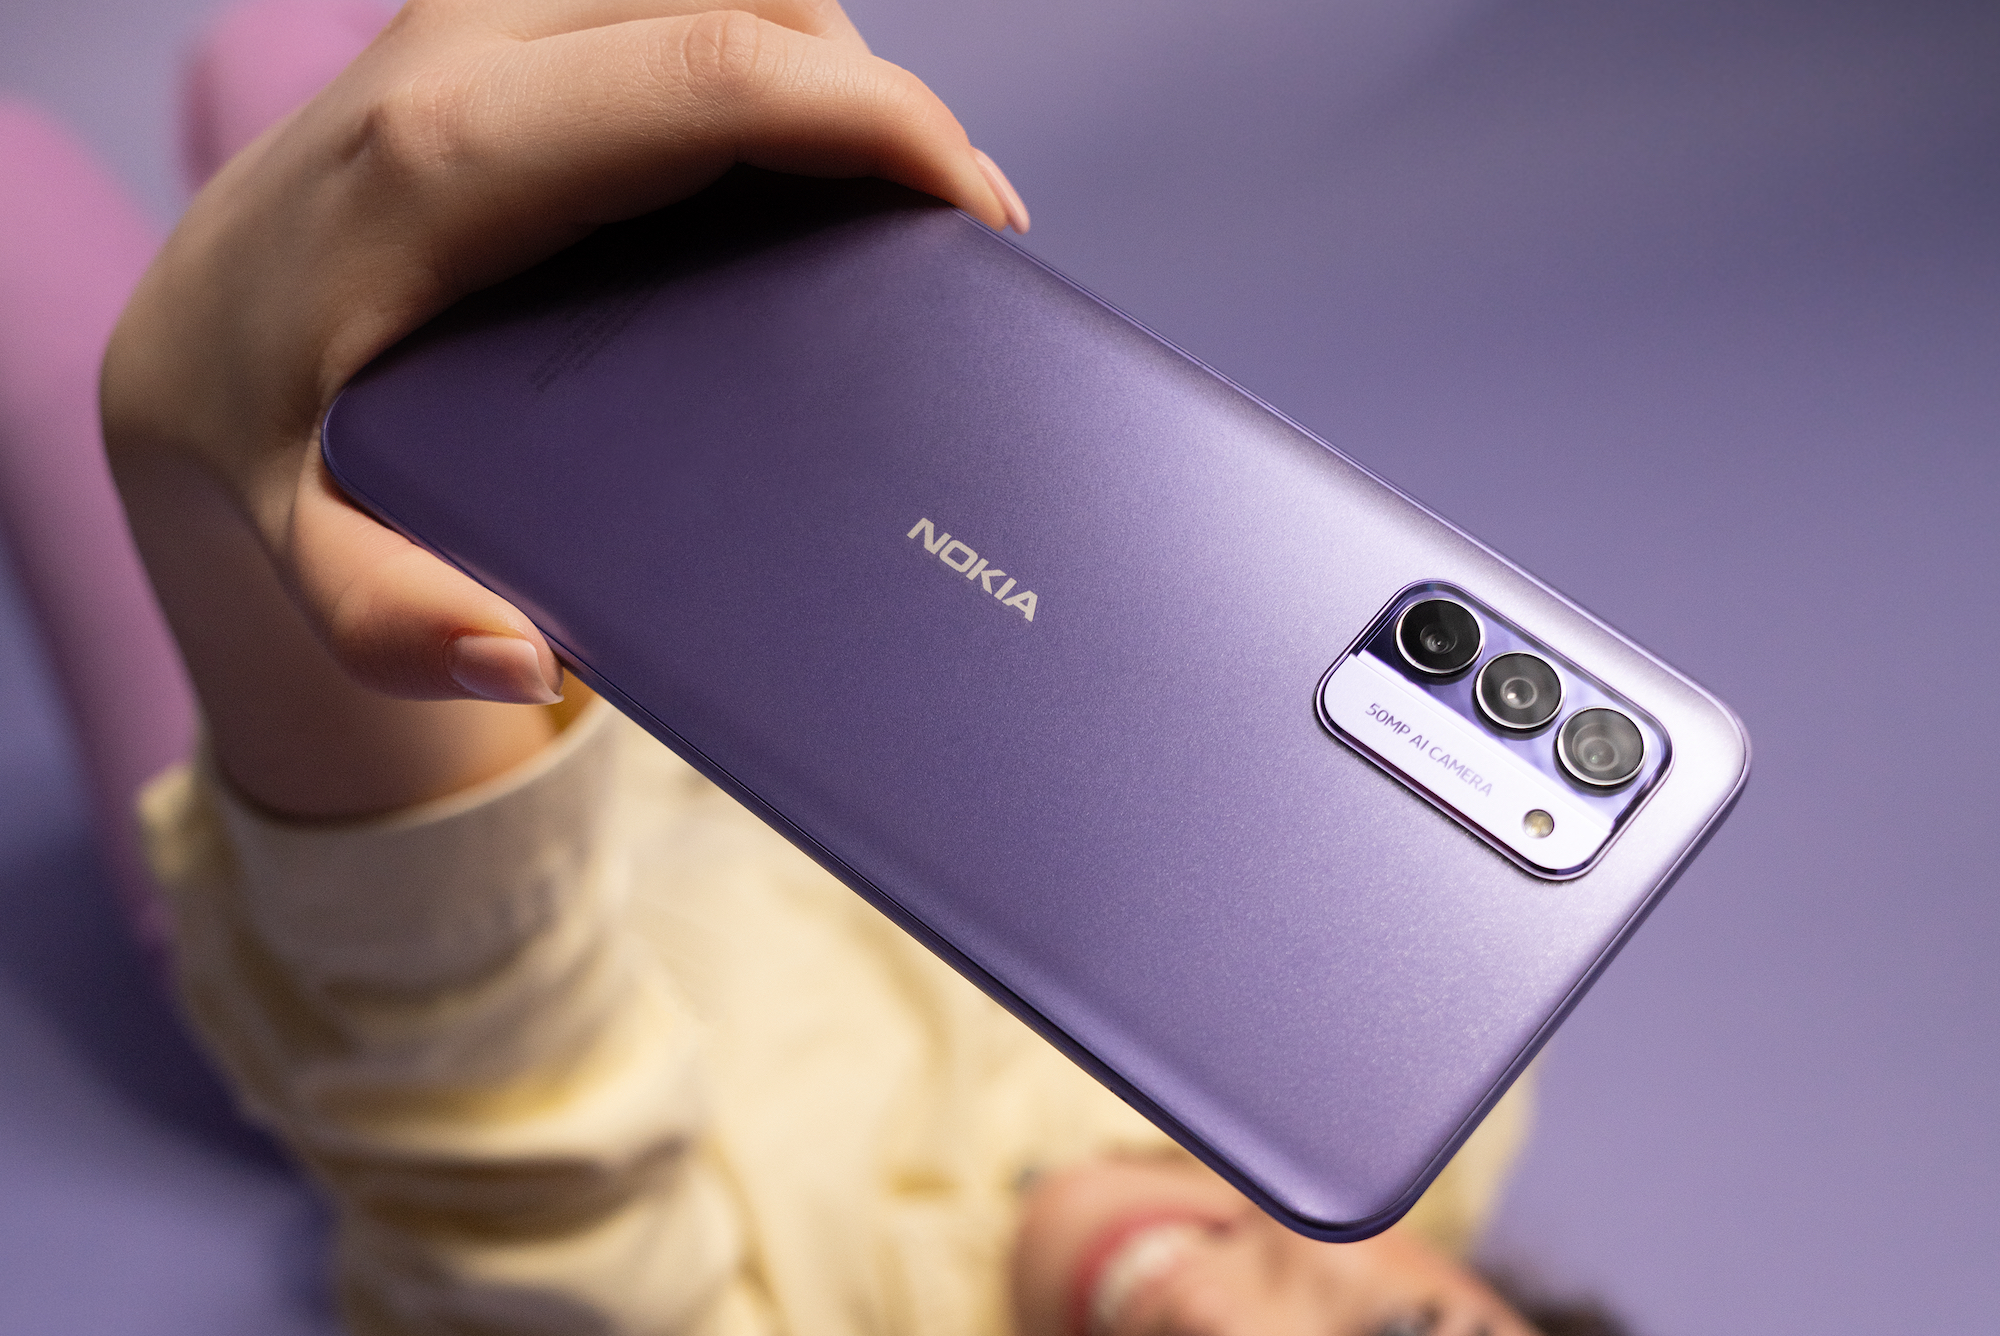 This Amazing Nokia Smartphone Available Less Than 5k, iPhone Fails in Terms  of Look & Design